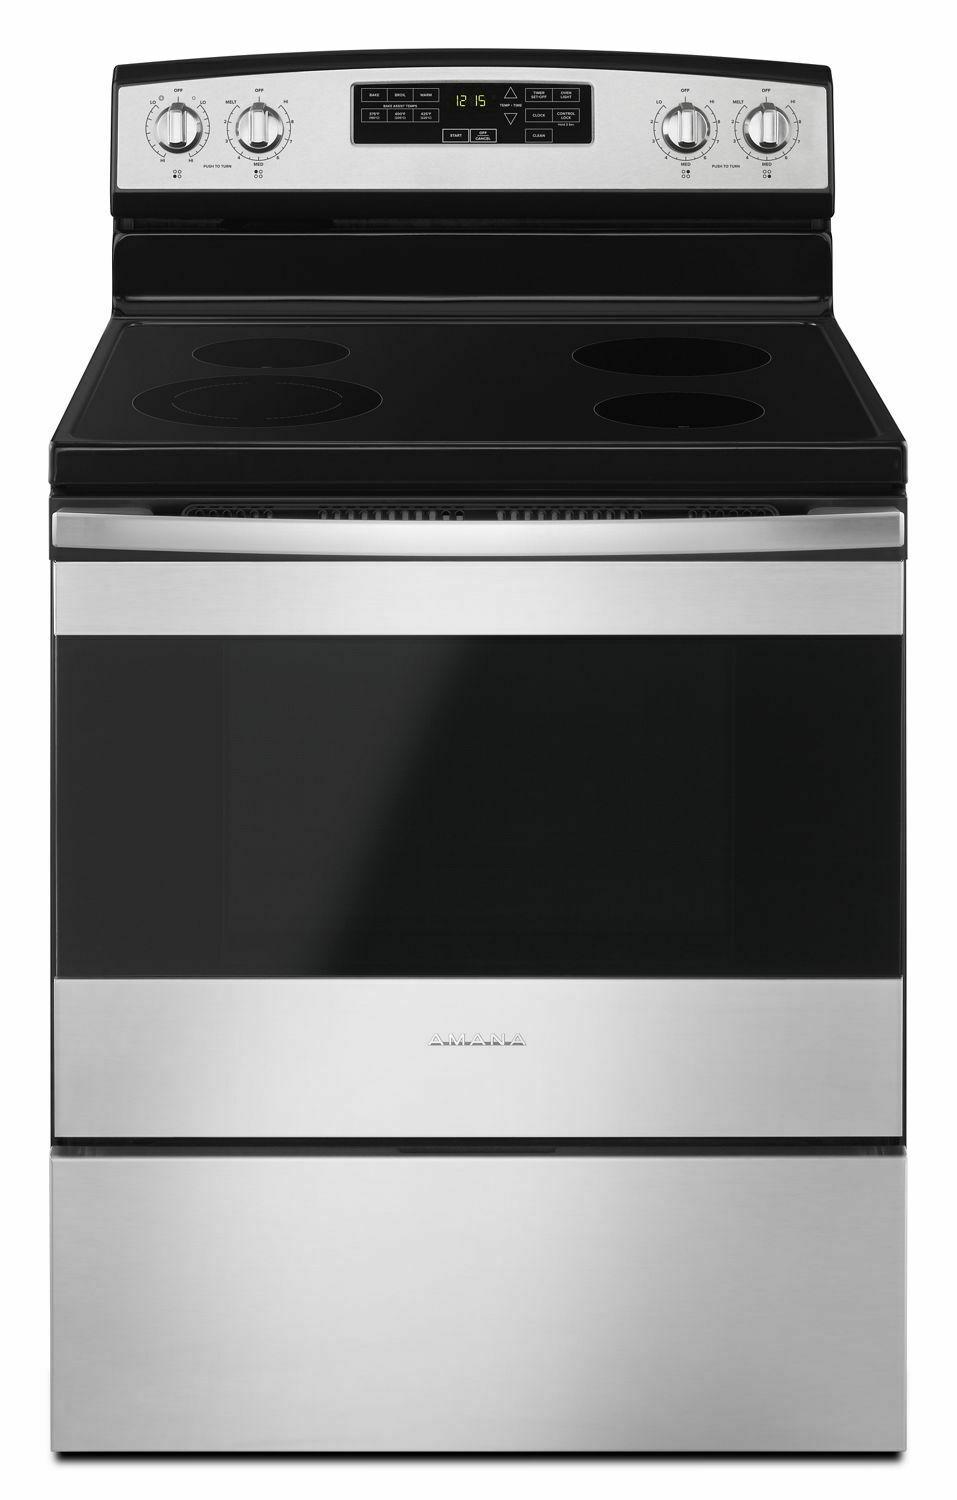 30-inch Amana® Electric Range with Extra-Large Oven Window - Black-on-Stainless